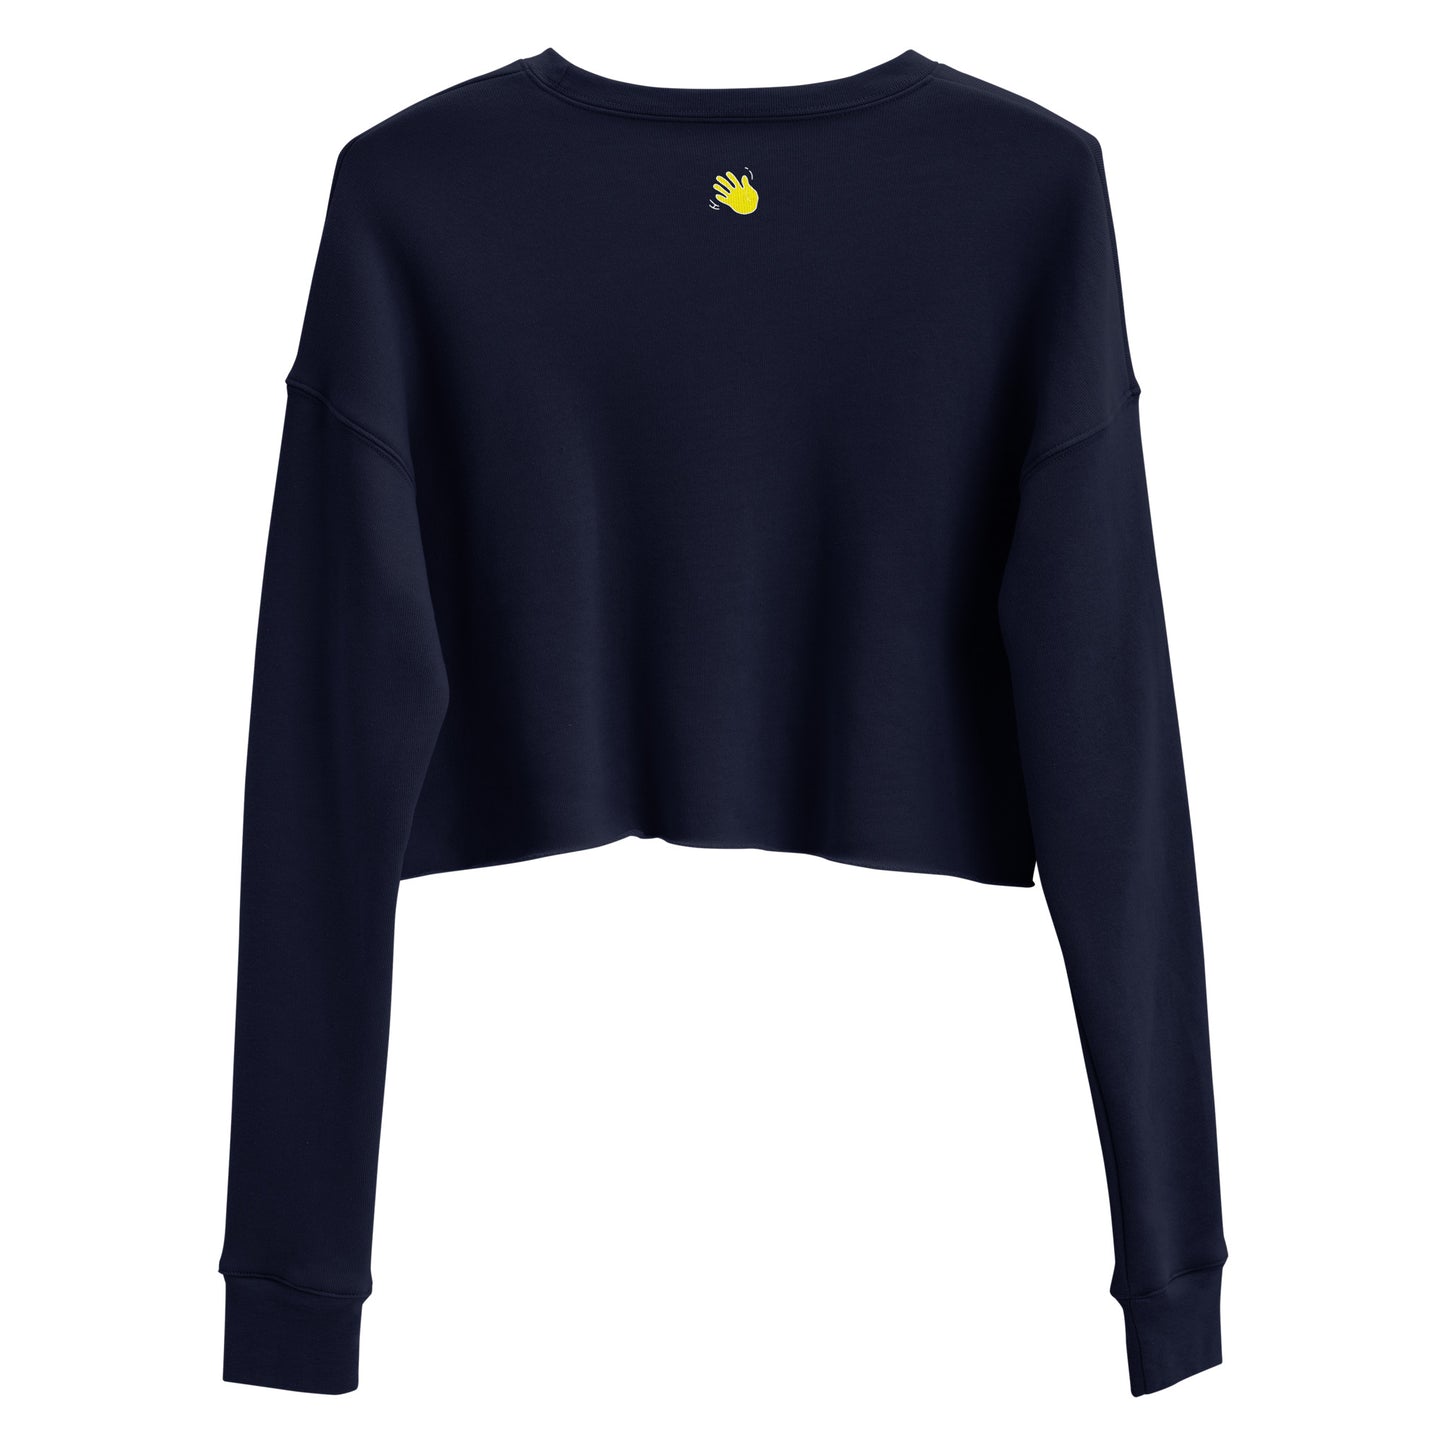 Hi Cropped Sweatshirt from Happy interactions in Navy  'ello love — Greeting in British English